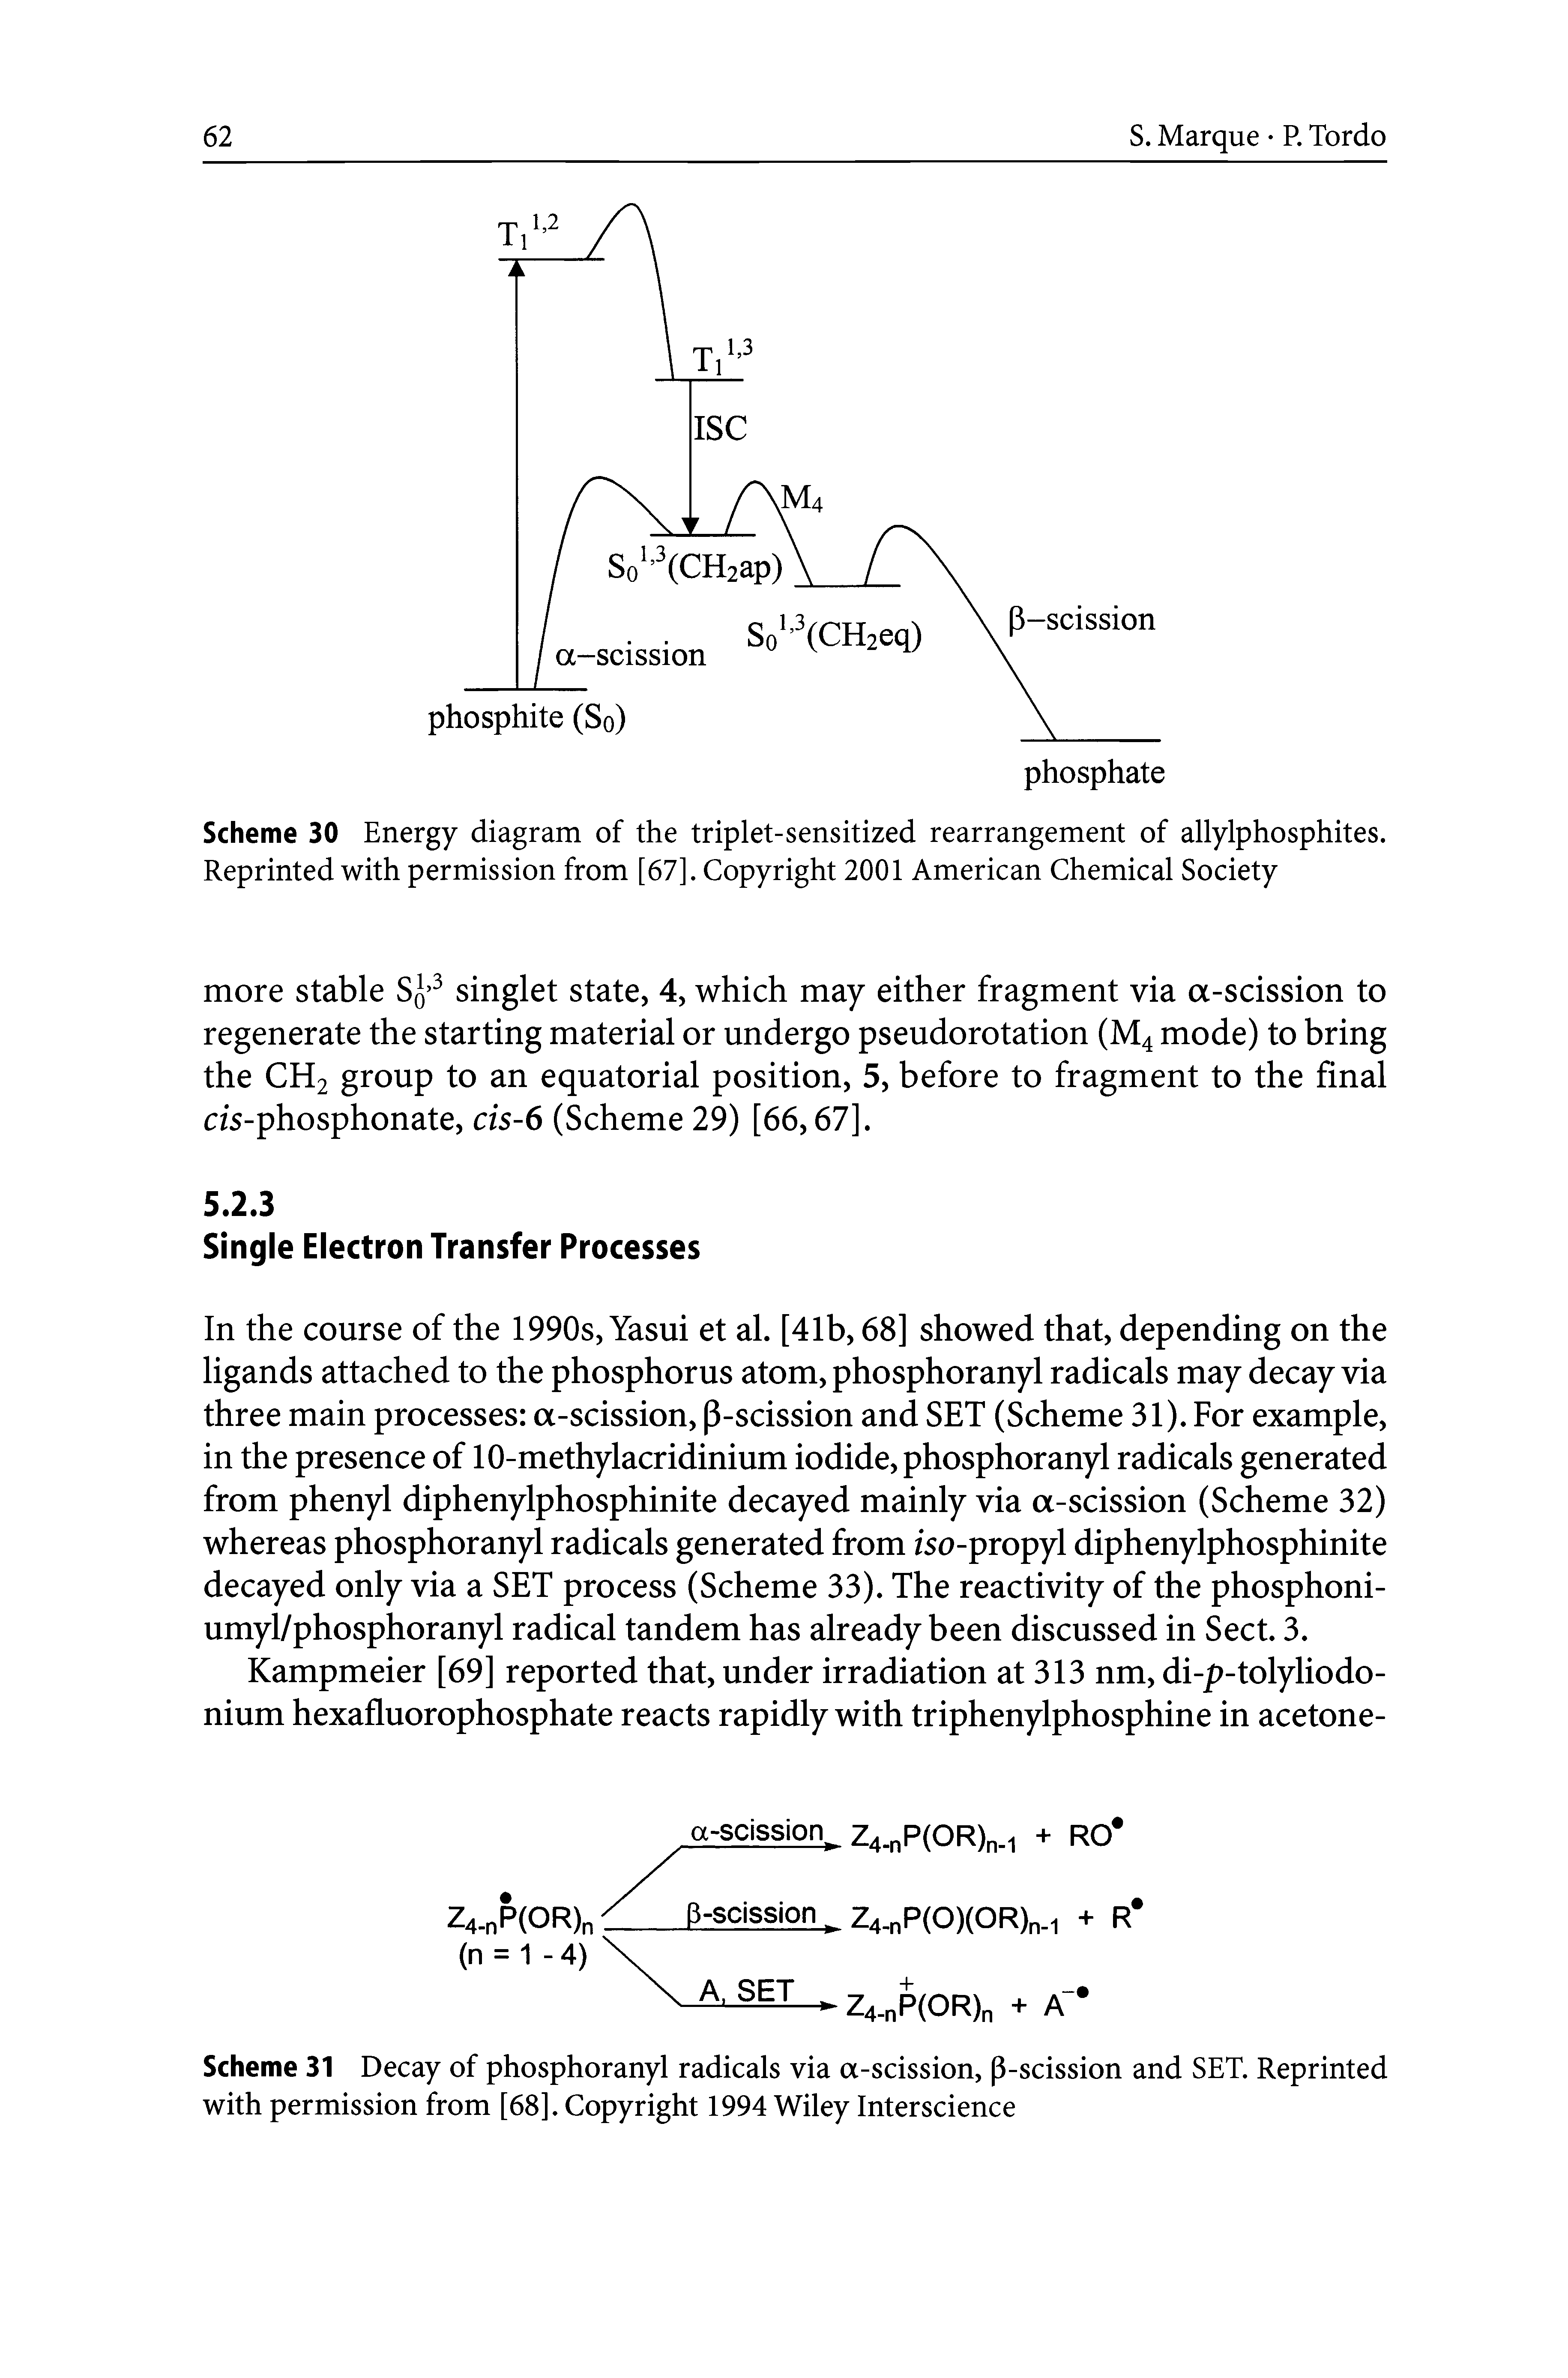 Scheme 31 Decay of phosphoranyl radicals via a-scission, p-scission and SET. Reprinted with permission from [68]. Copyright 1994 Wiley Interscience...